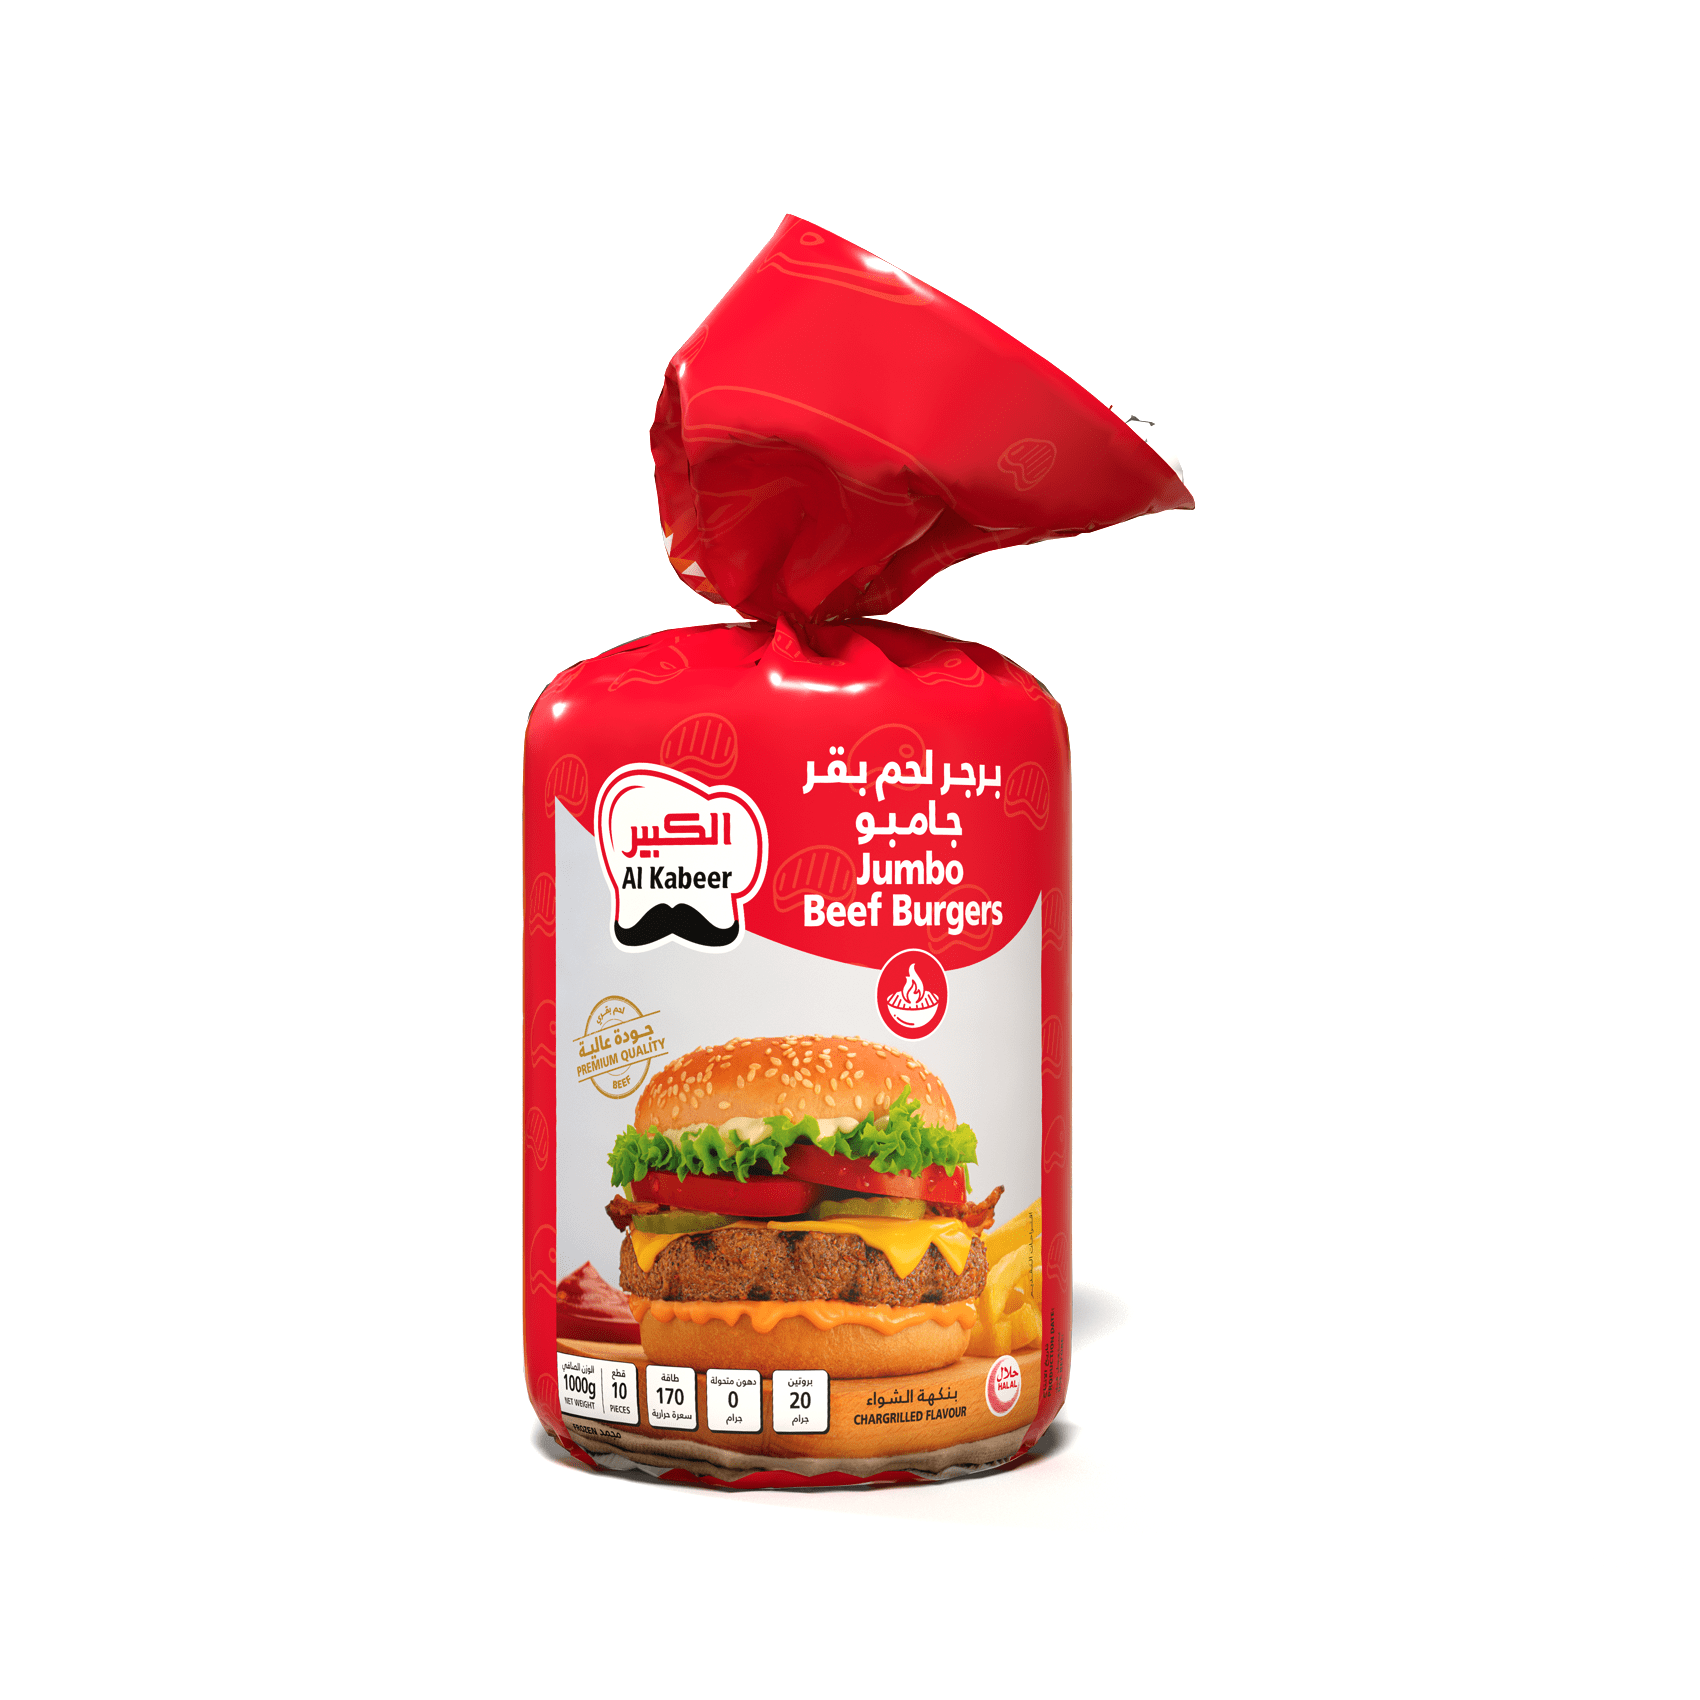 JUMBO BEEF BURGERS CHARGRILLED FLAVOUR 1000G